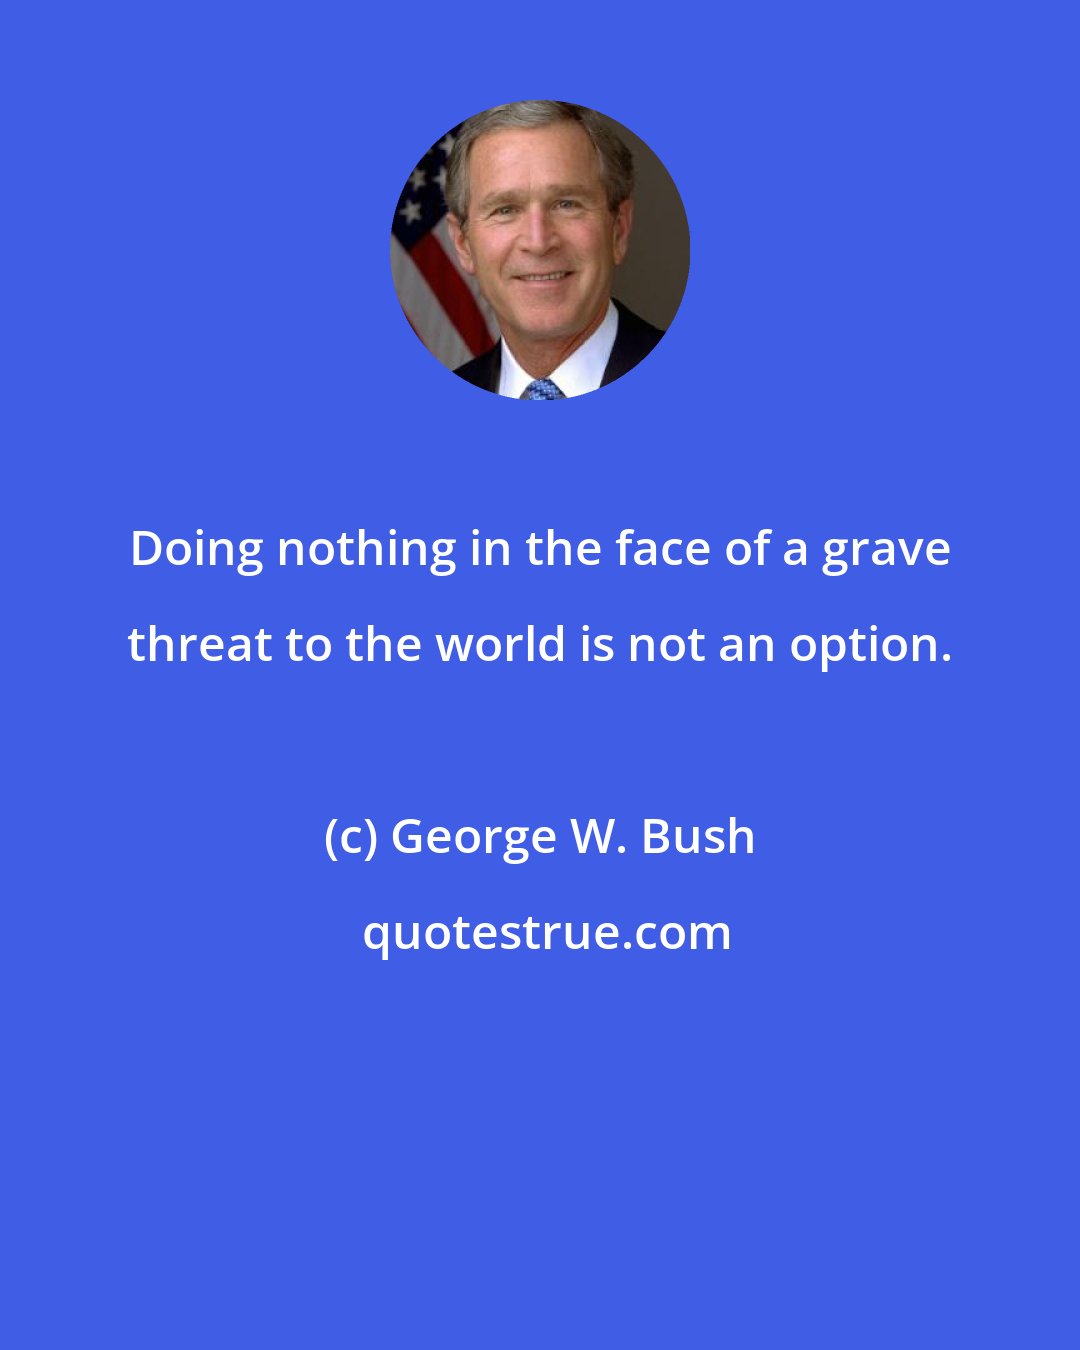 George W. Bush: Doing nothing in the face of a grave threat to the world is not an option.